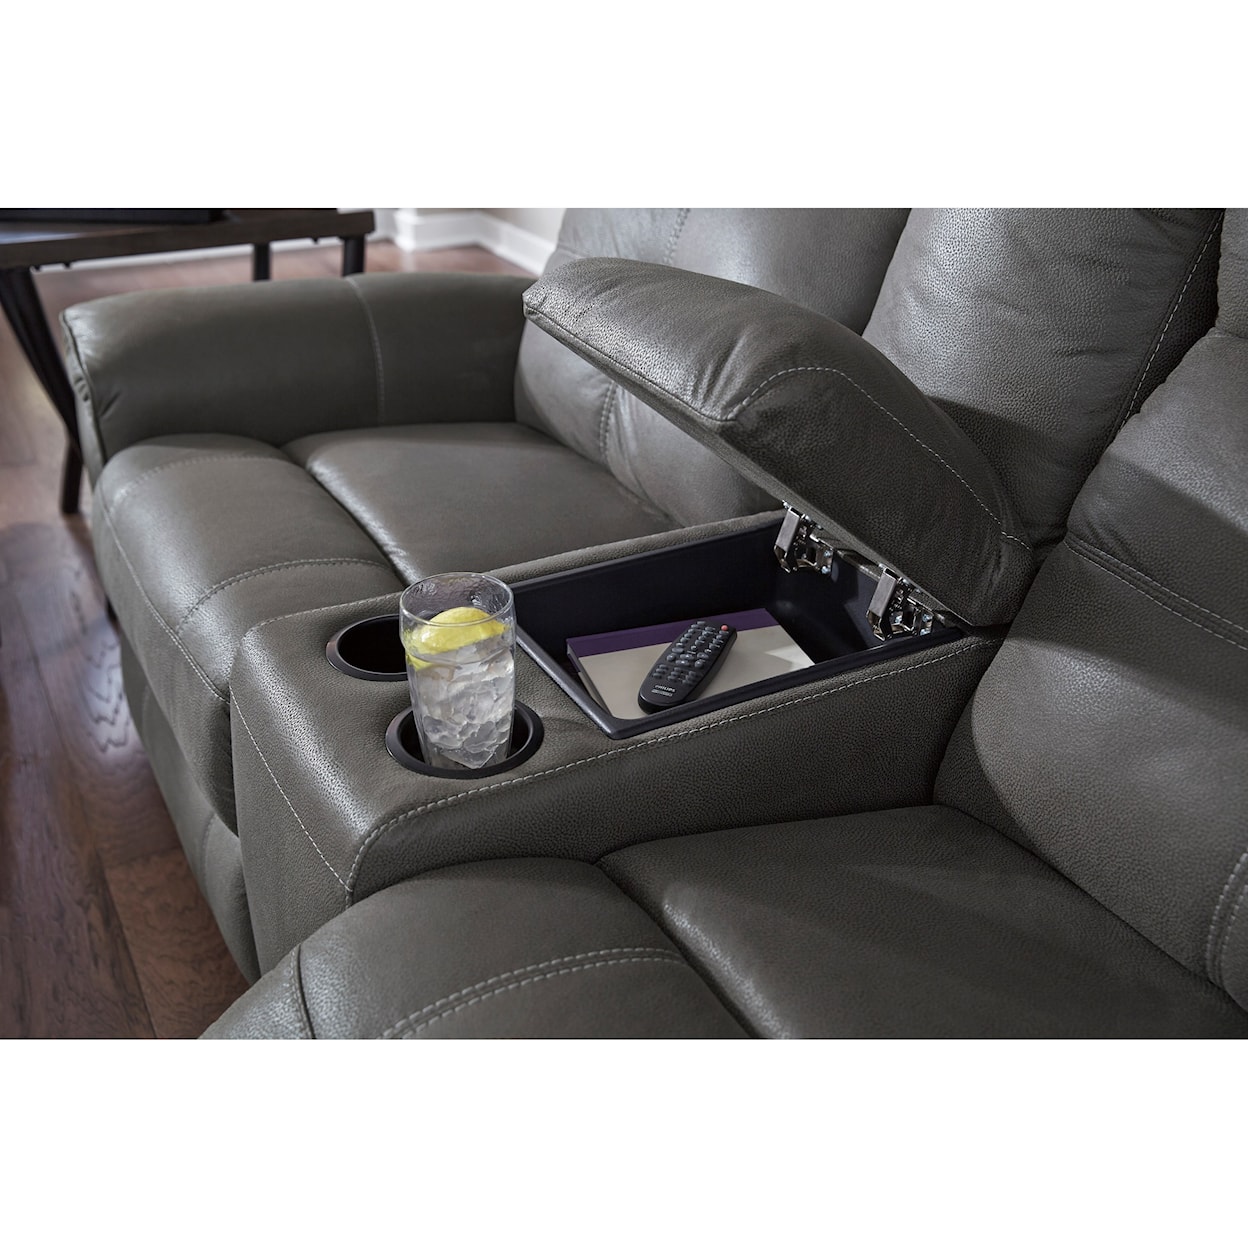 Benchcraft Jesolo Double Reclining Loveseat with Console